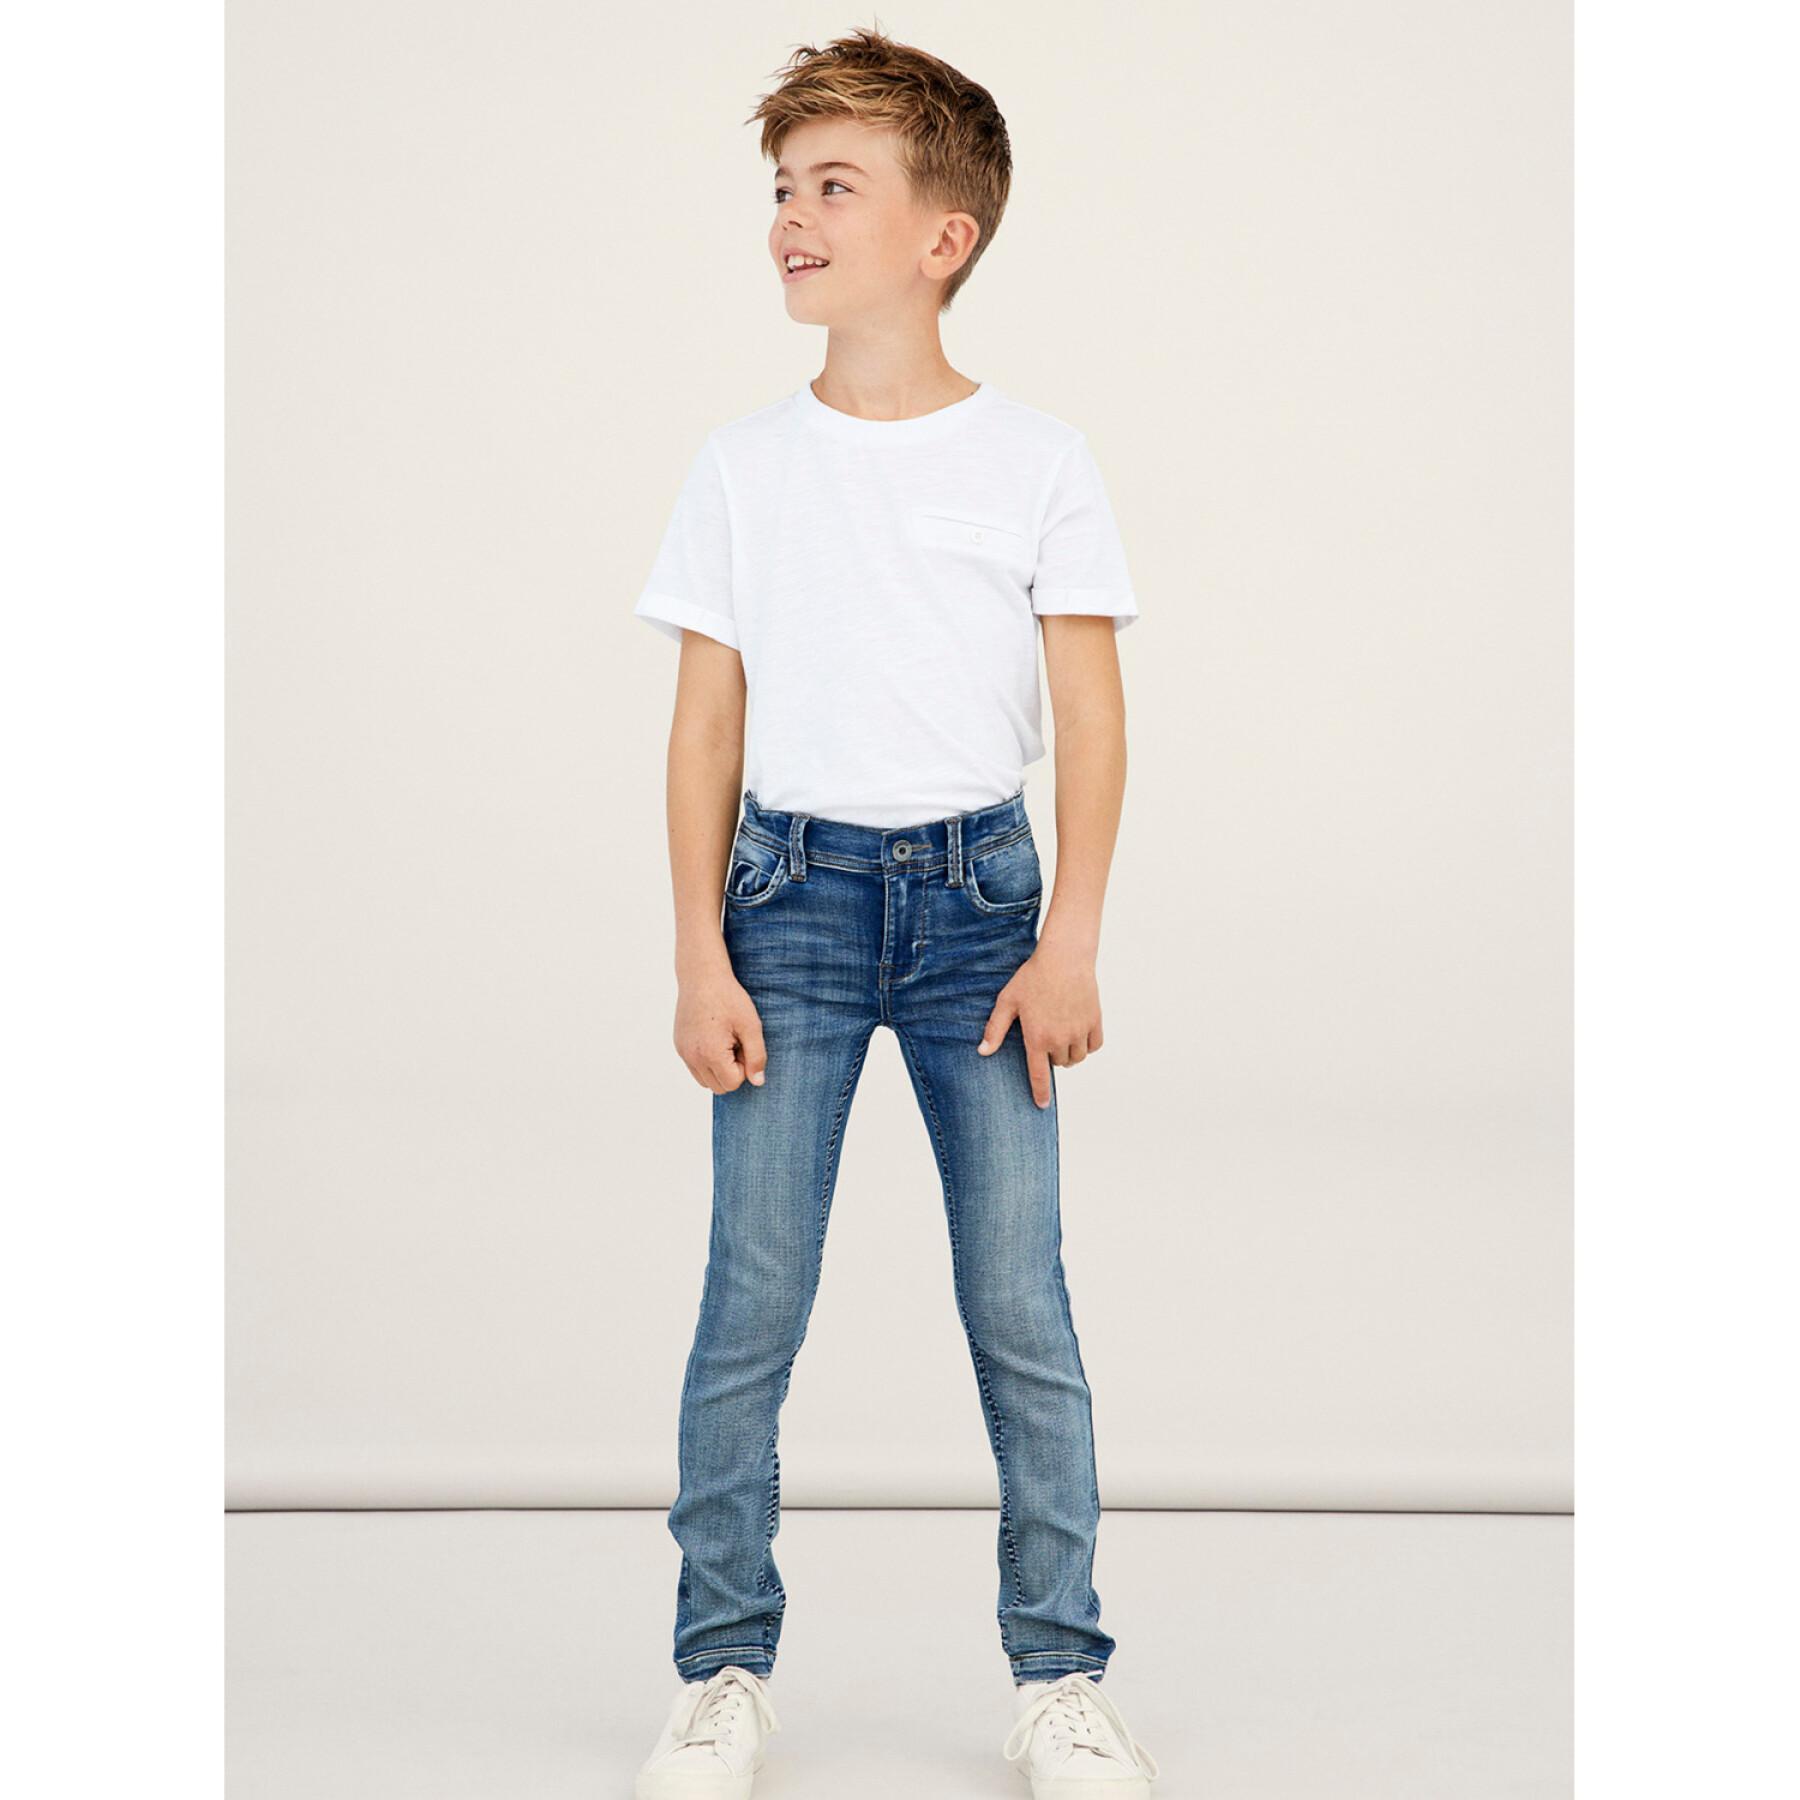 Children's jeans Name it Theo Thayer